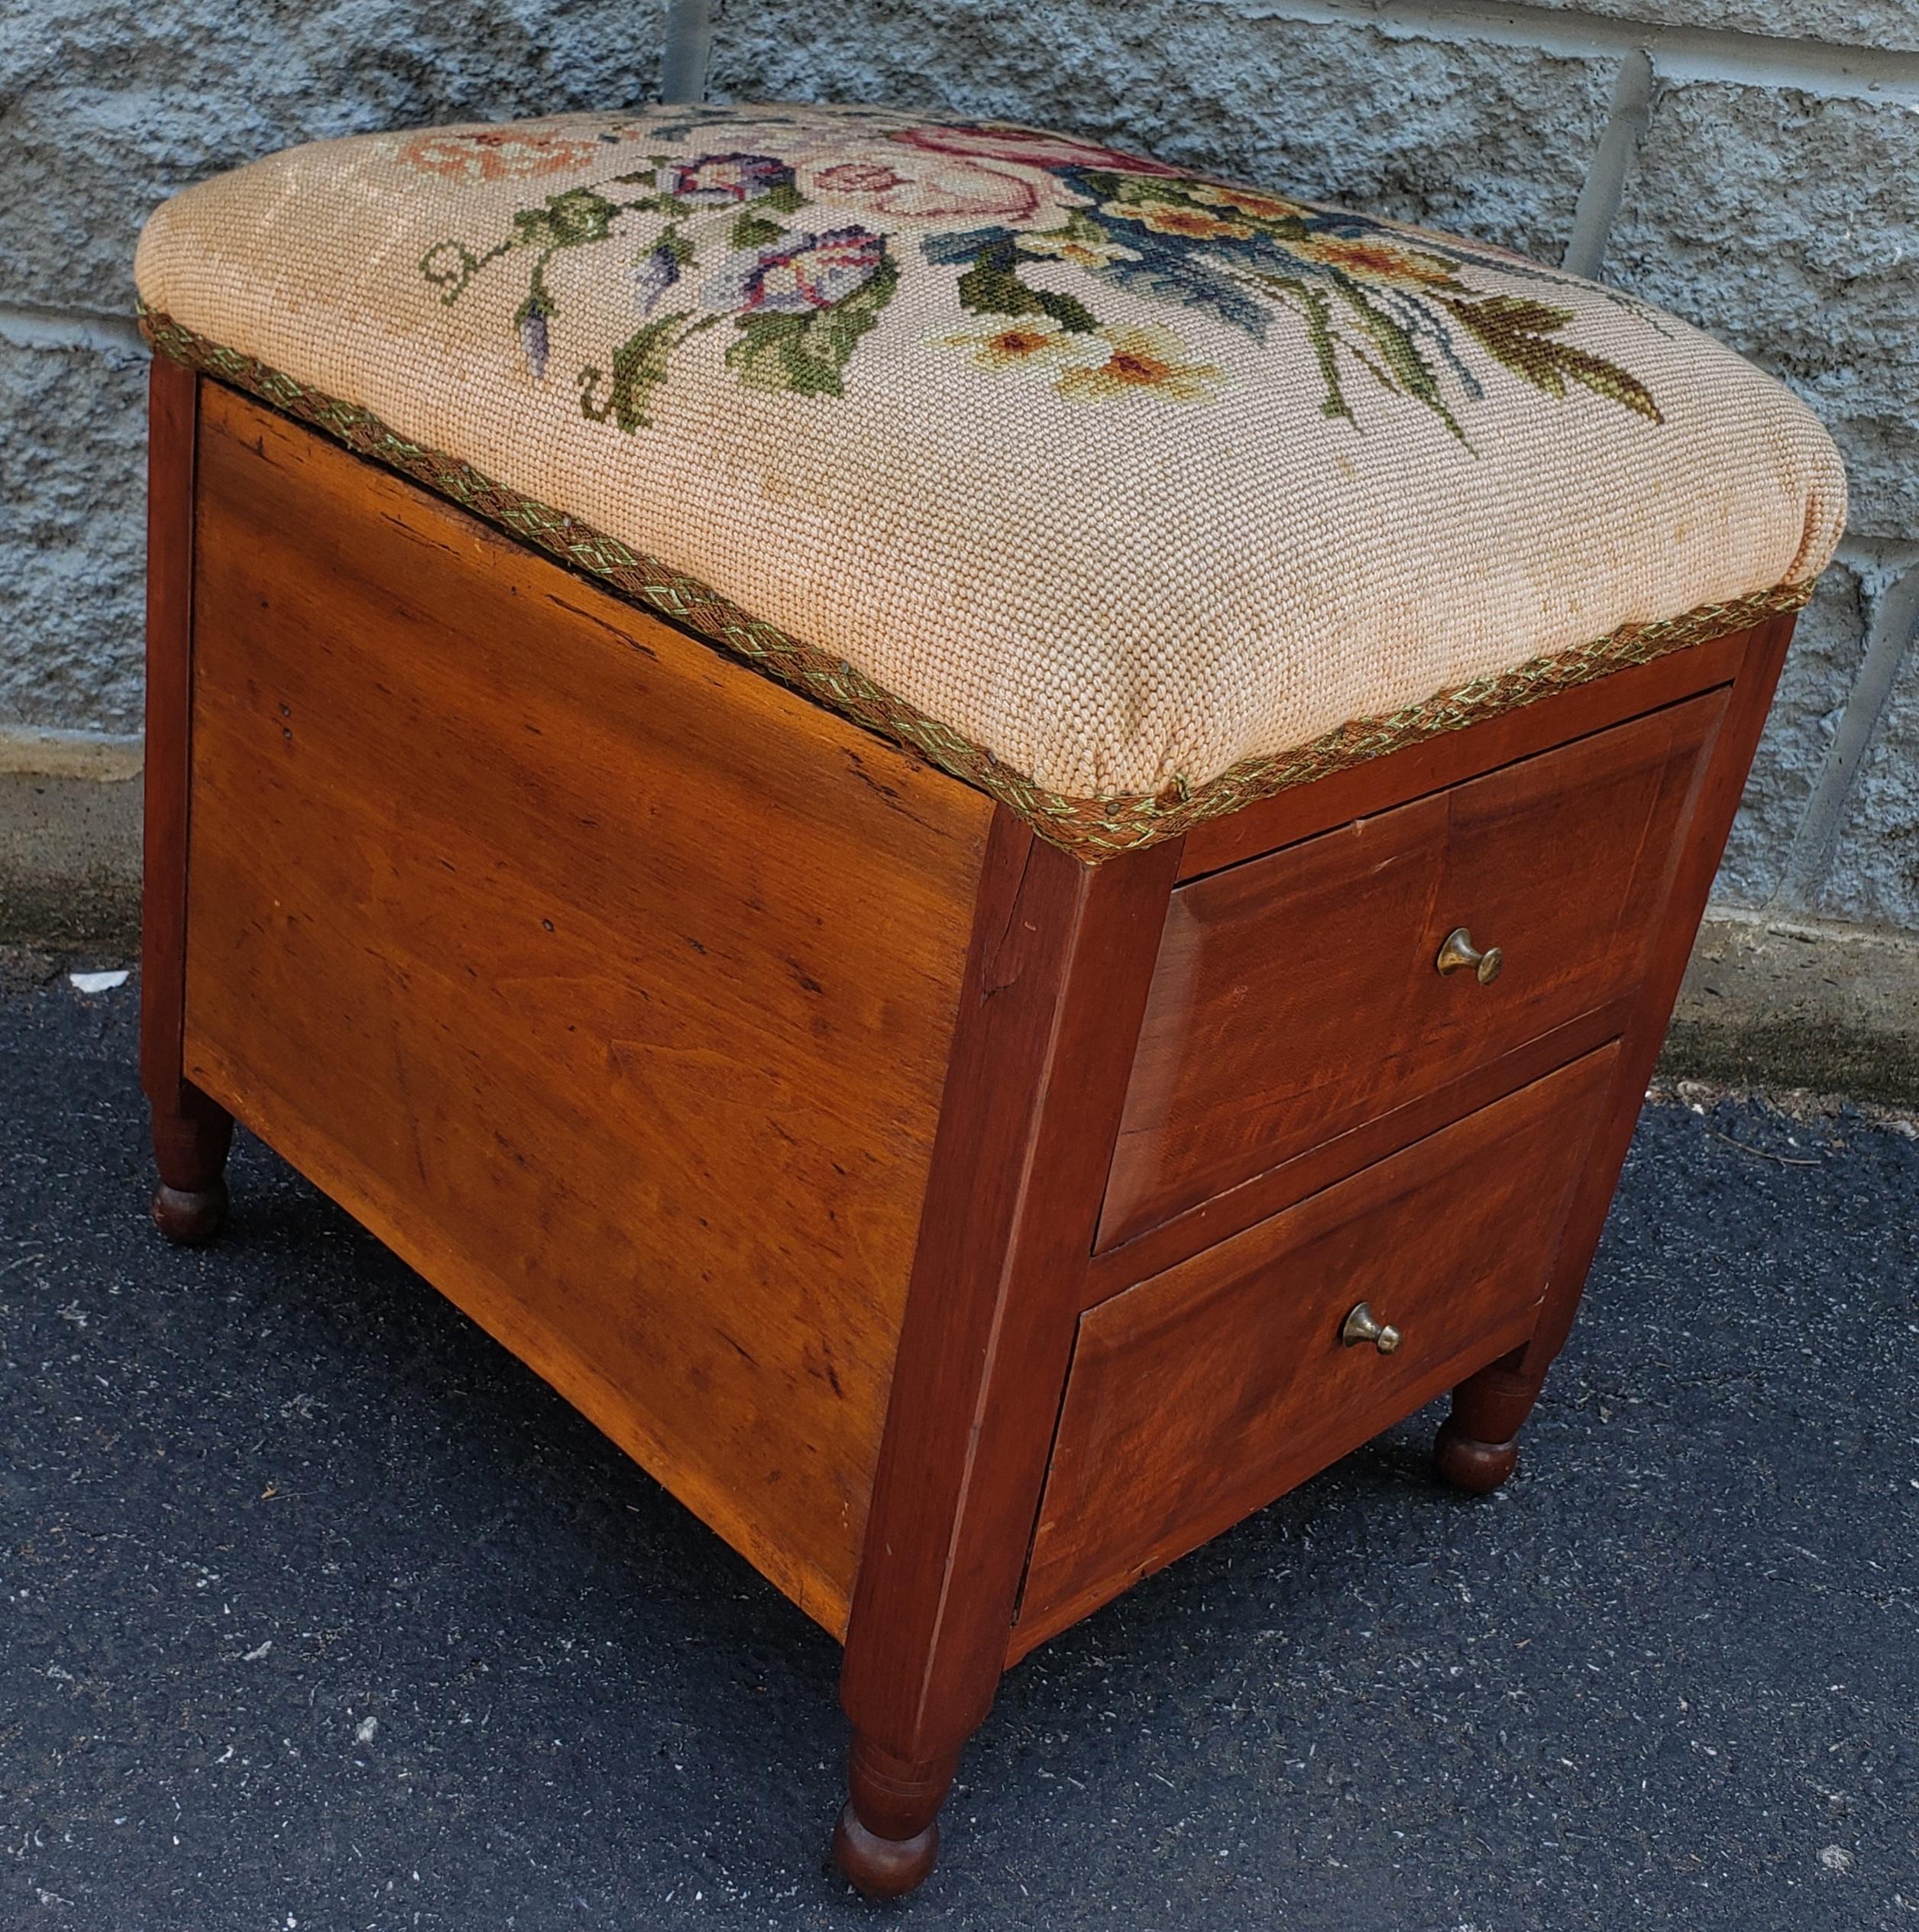 Victorian Two-Drawer Mahogany Needlework Upholstered Stool on Wheels In Good Condition For Sale In Germantown, MD